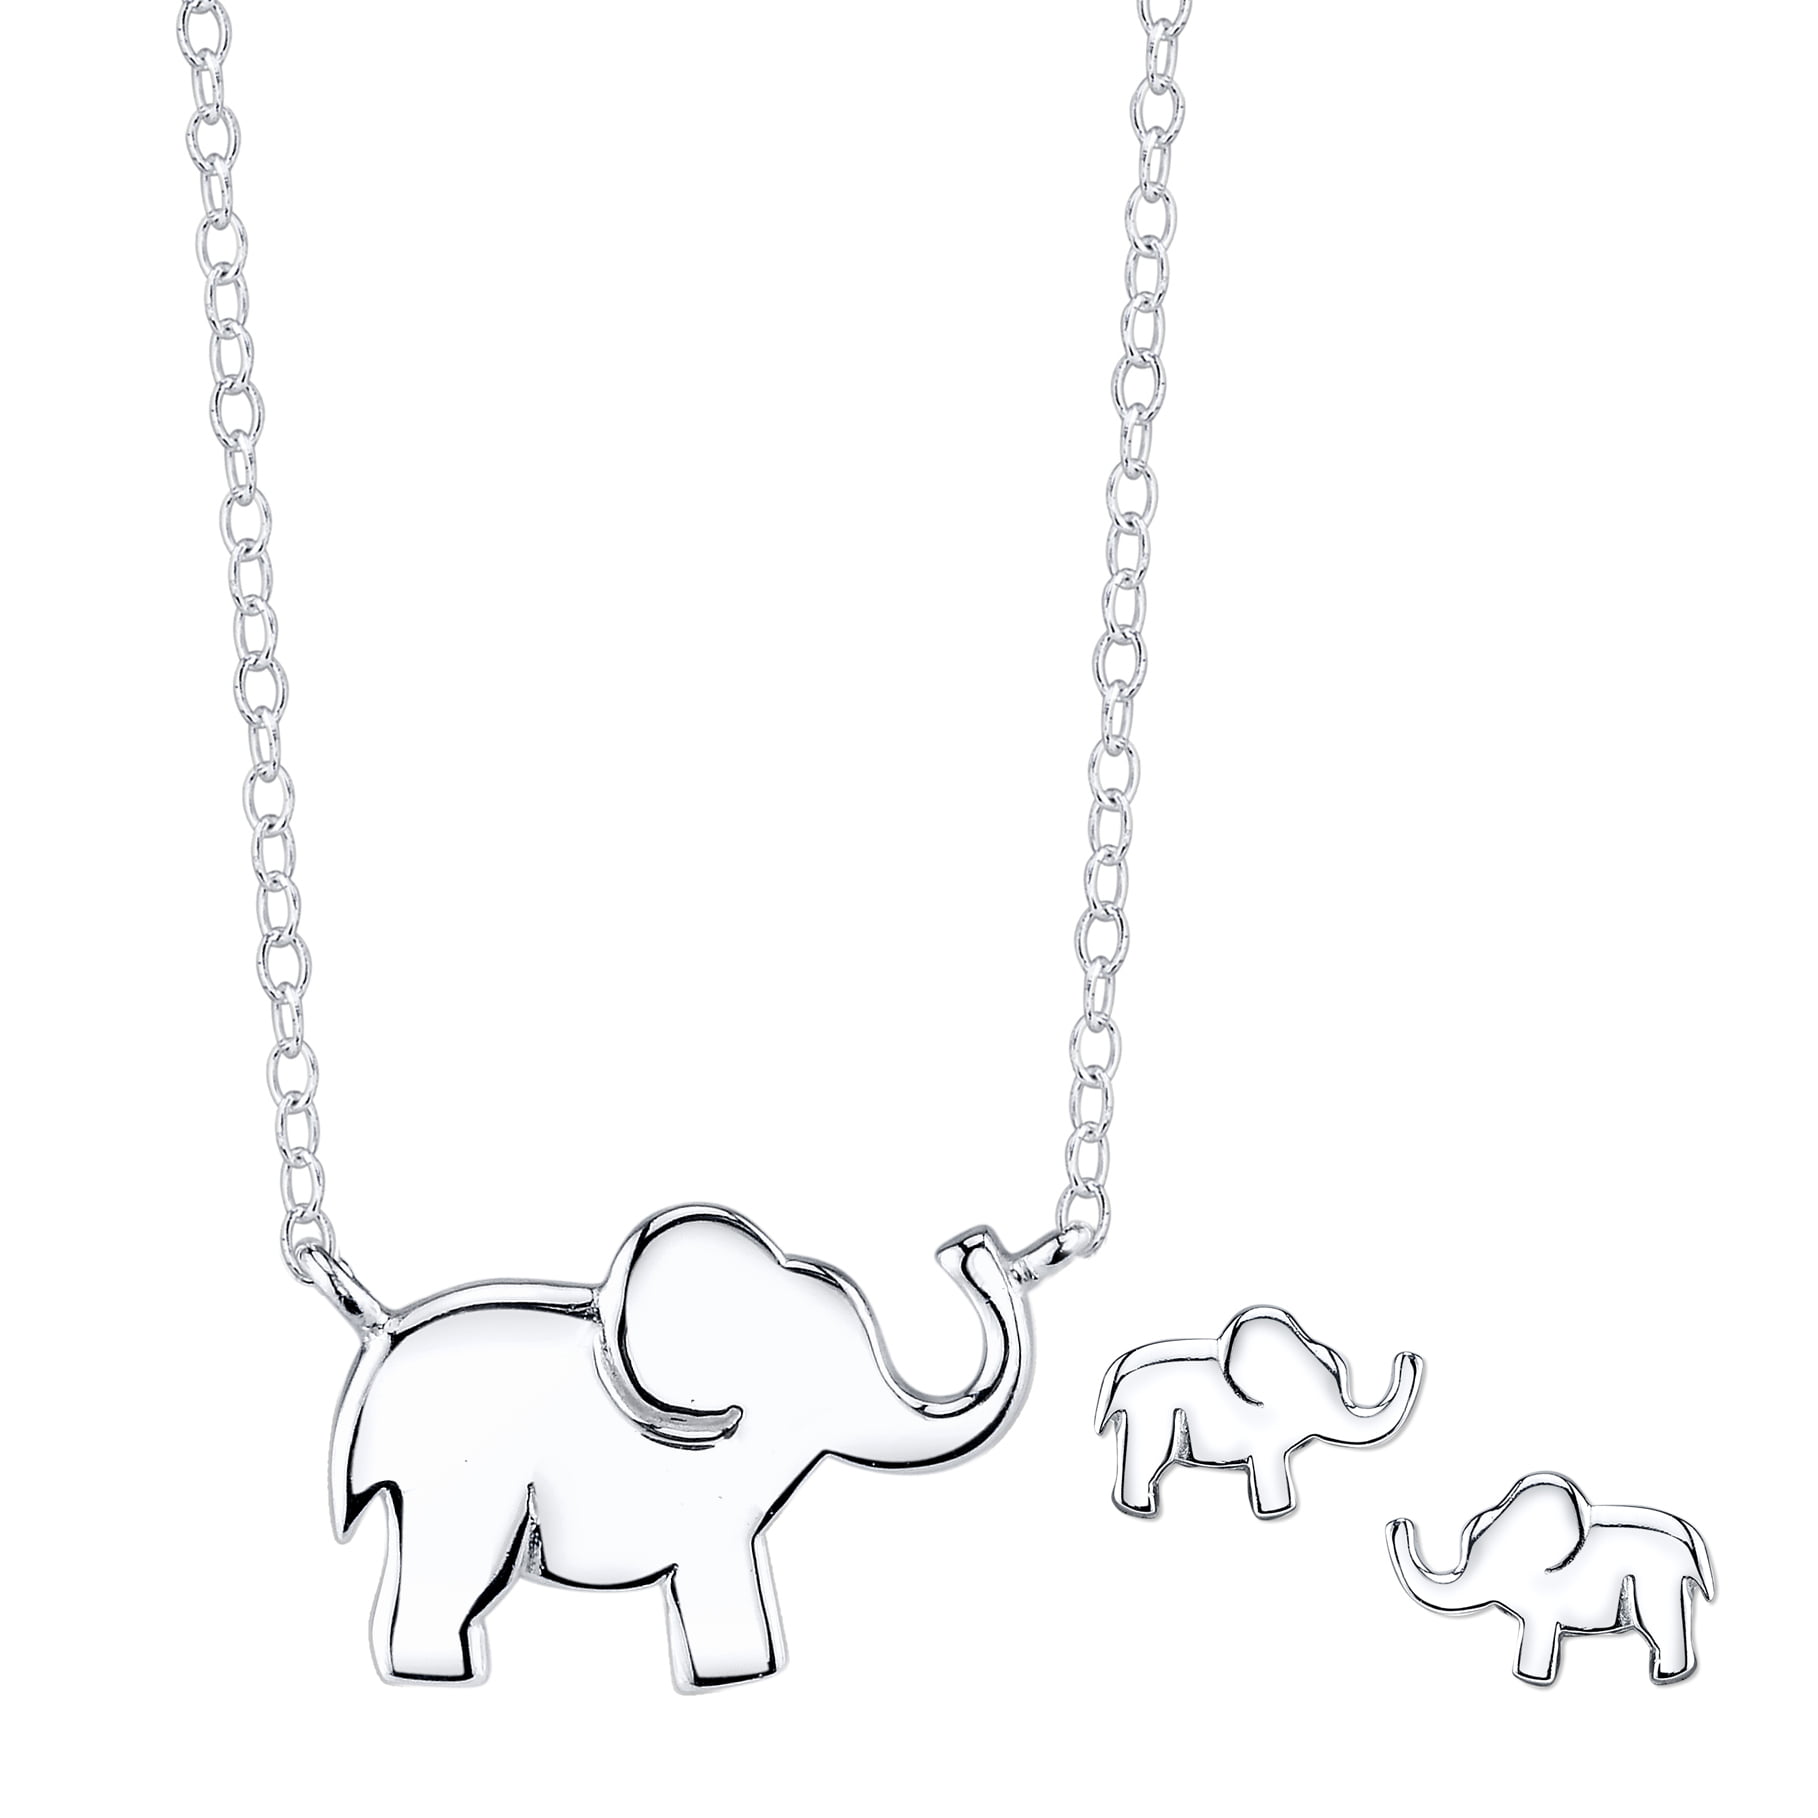 Elephant Jewellery Sterling Silver Elephant Mother and Daughter Son Stud Earrings,Elephant Necklace,Elephant Necklace and Earrings Set For Women Girls